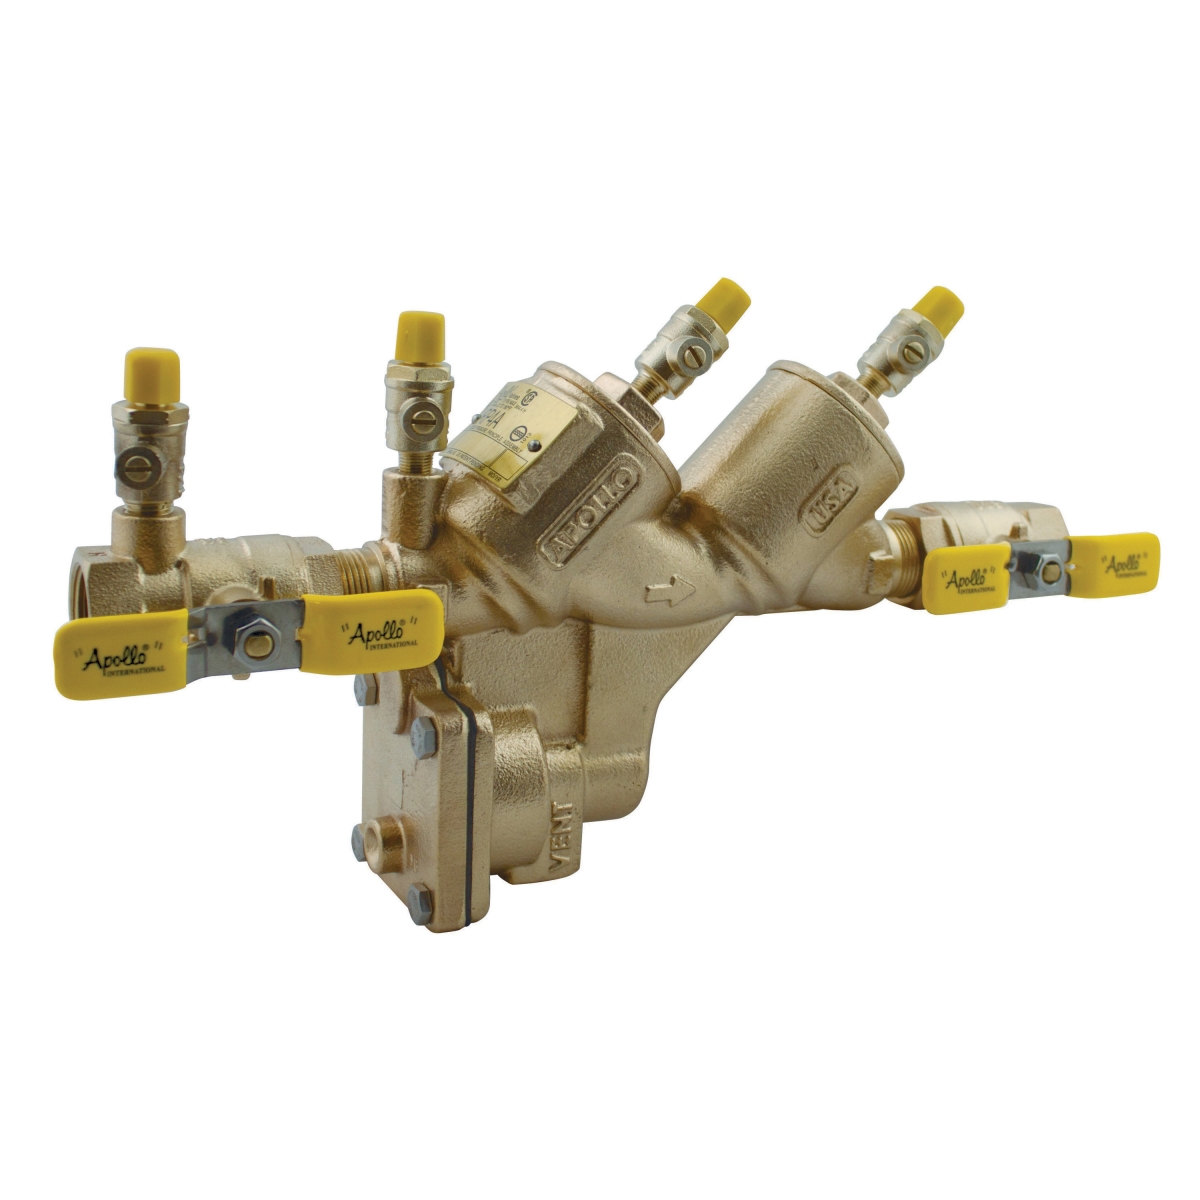 Conbraco Industries 8976466 Threaded Bronze Reduced Pressure Backflow Preventer With Lead Free Valve